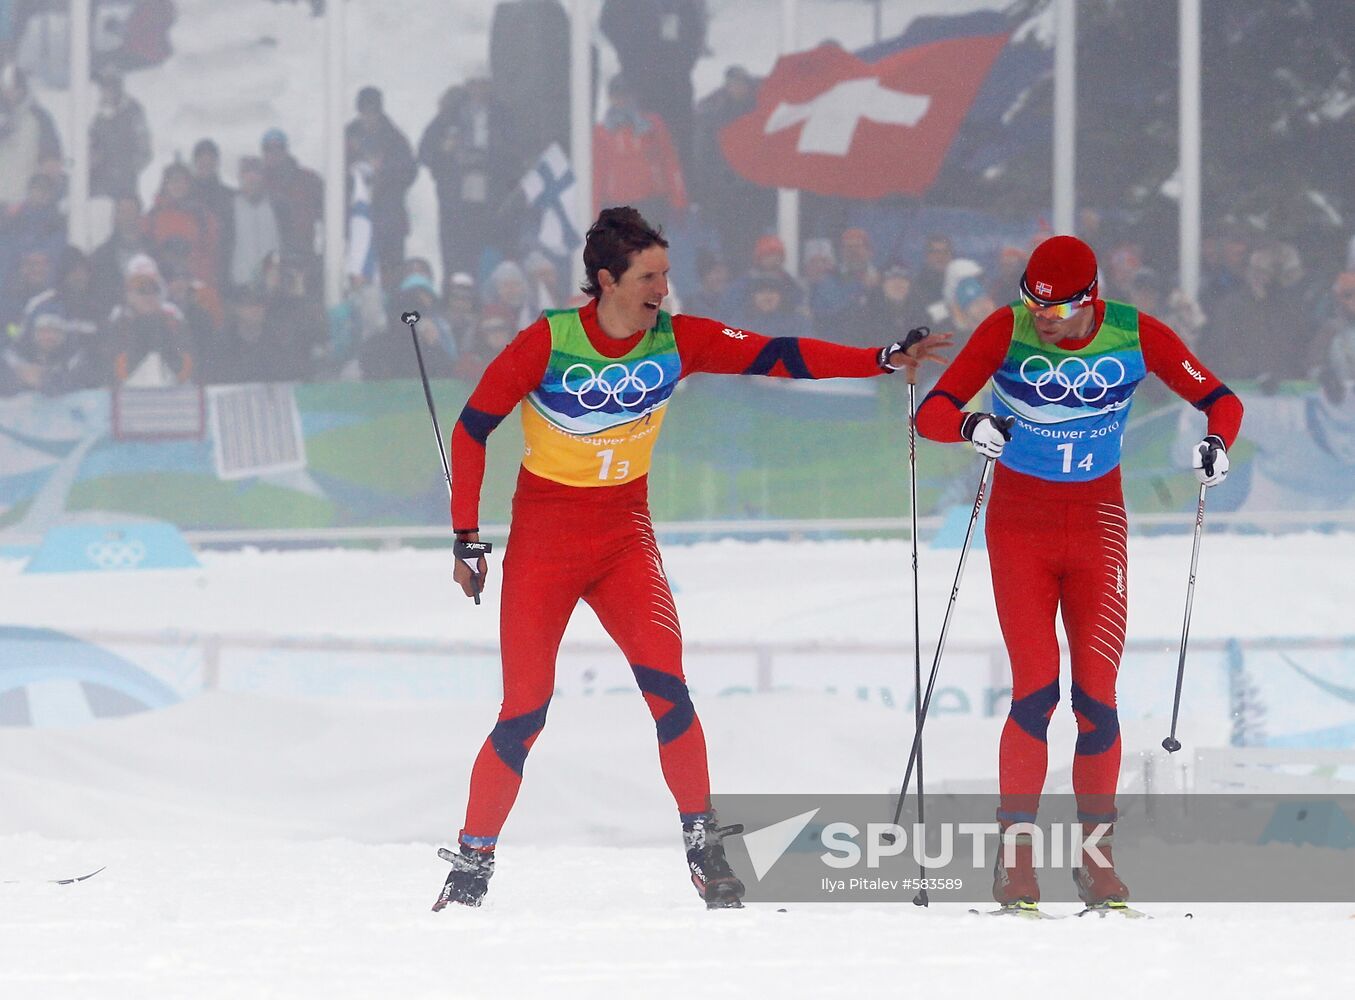 Lars Berger and Petter Northug